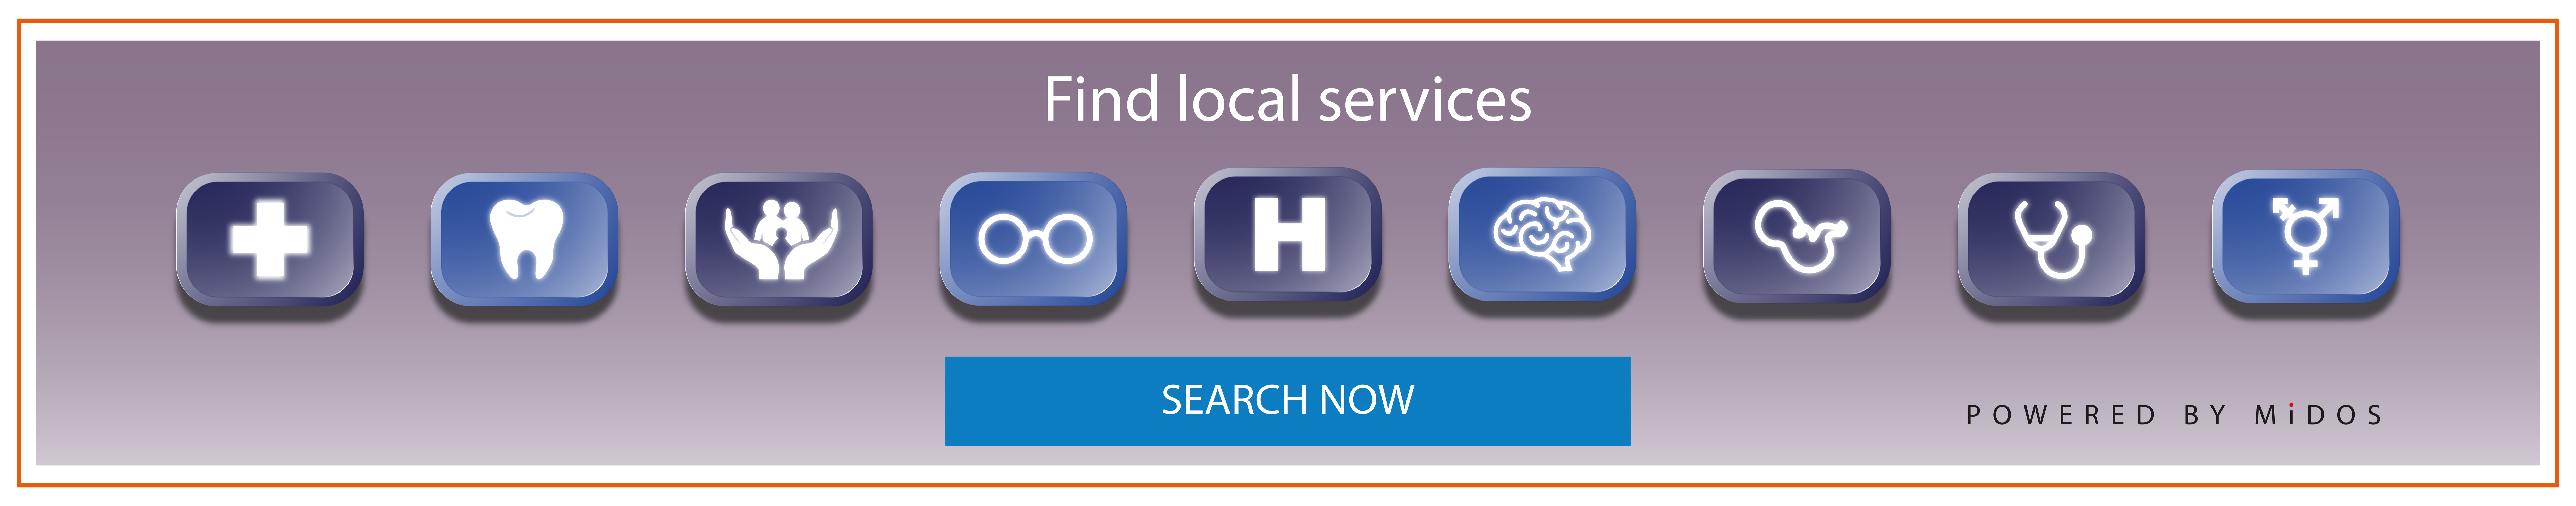 Find local services with MiDOS